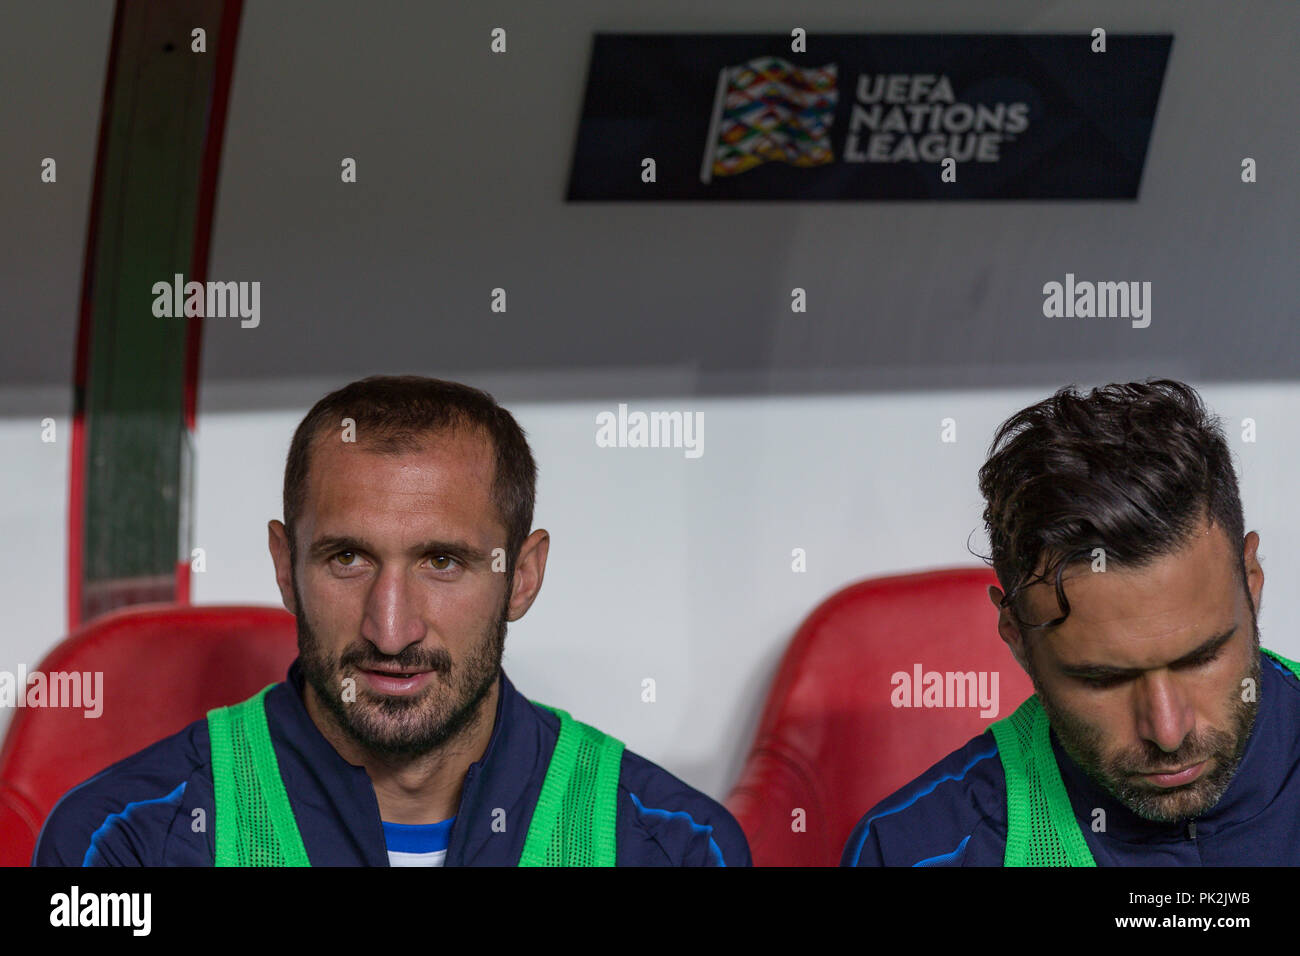 Lisbon, Portugal. 10th September, 2018. Italy's defender Giorgio Chiellini (3) during the game of the Final Tournament of the UEFA Nations League between Portugal and Italy © Alexandre de Sousa/Alamy Live News Stock Photo